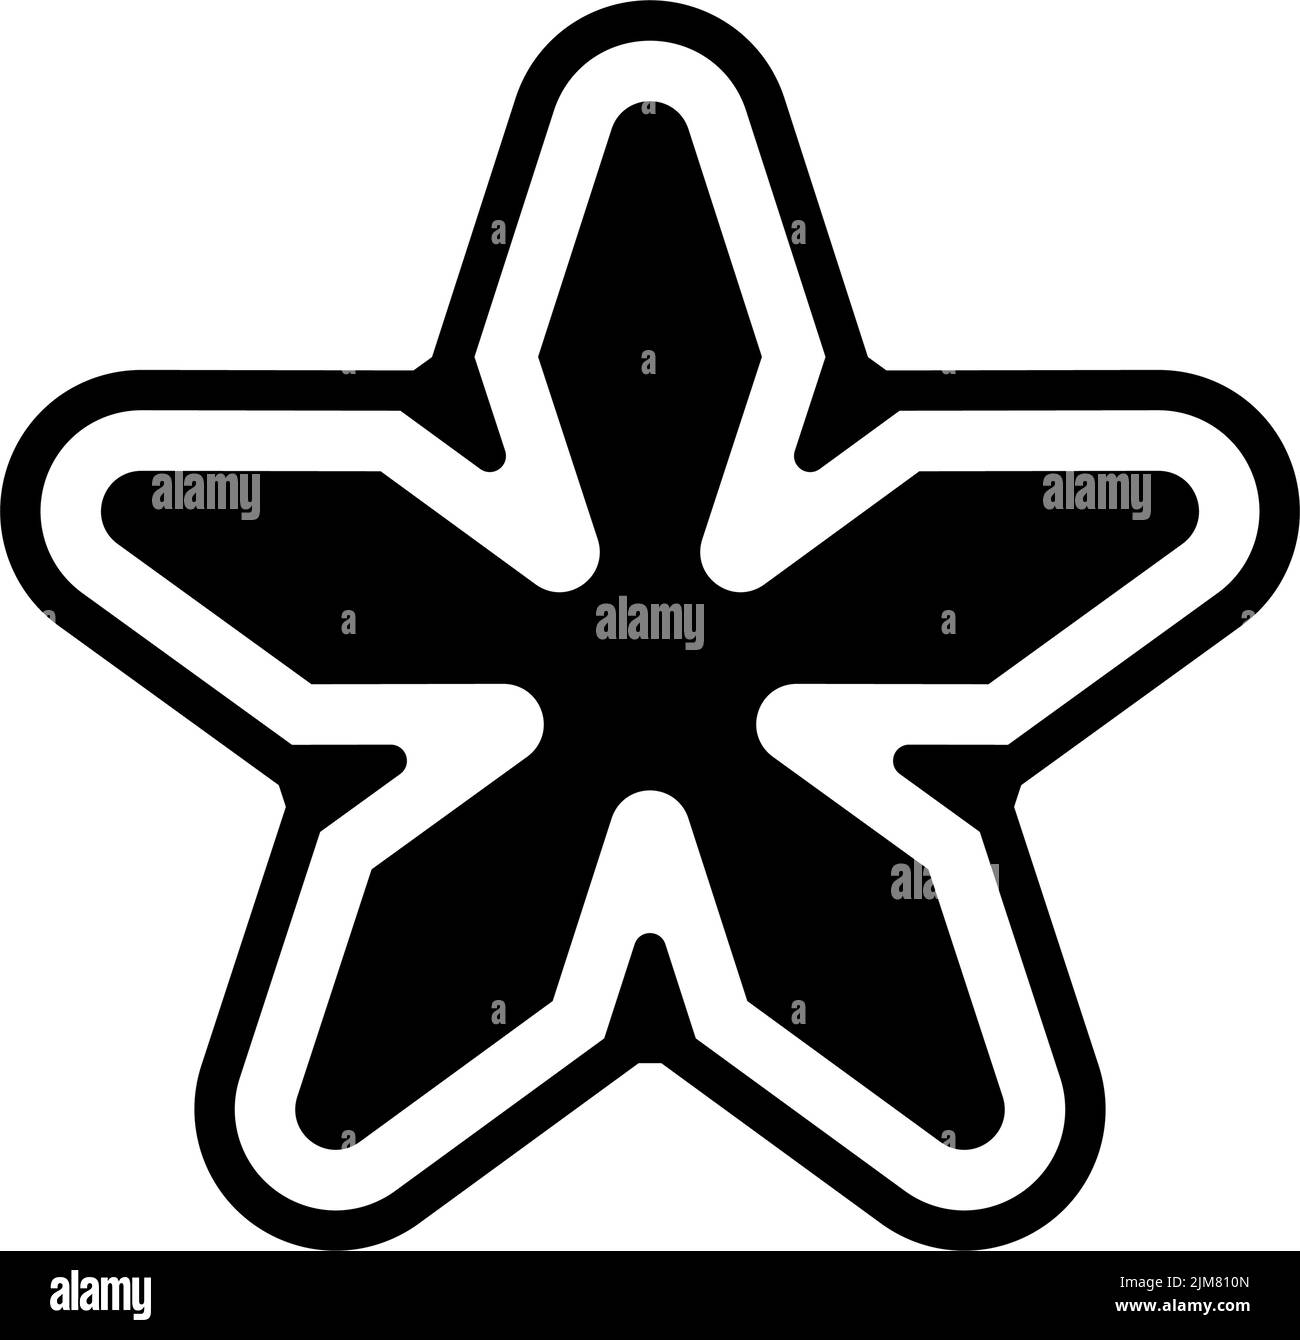 The black flower shaped star sign with white background Stock Vector